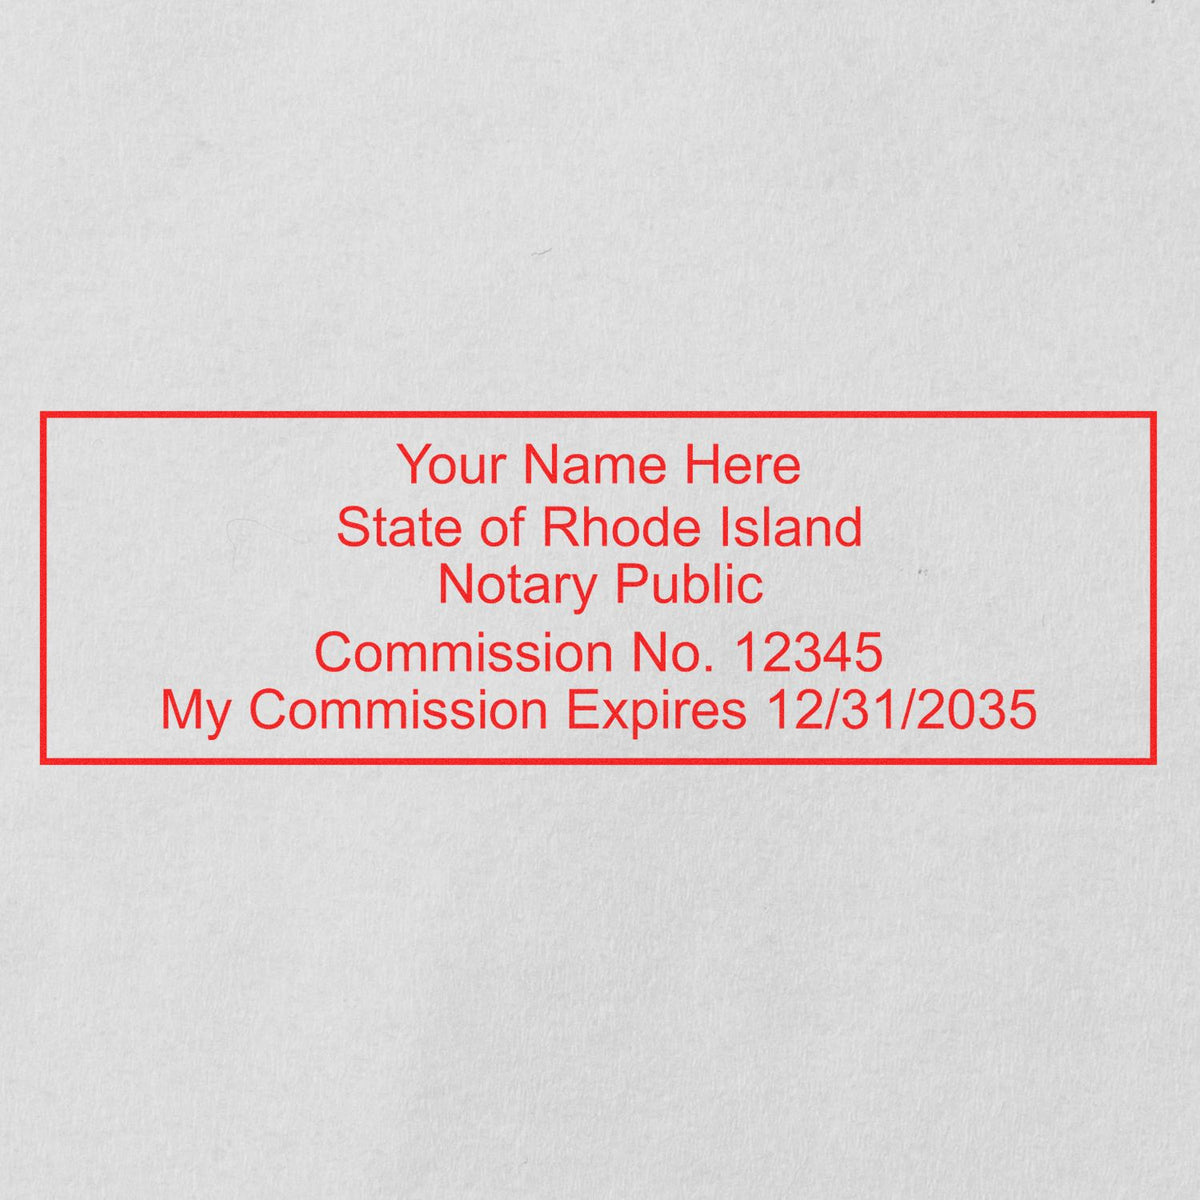 Another Example of a stamped impression of the Super Slim Rhode Island Notary Public Stamp on a piece of office paper.